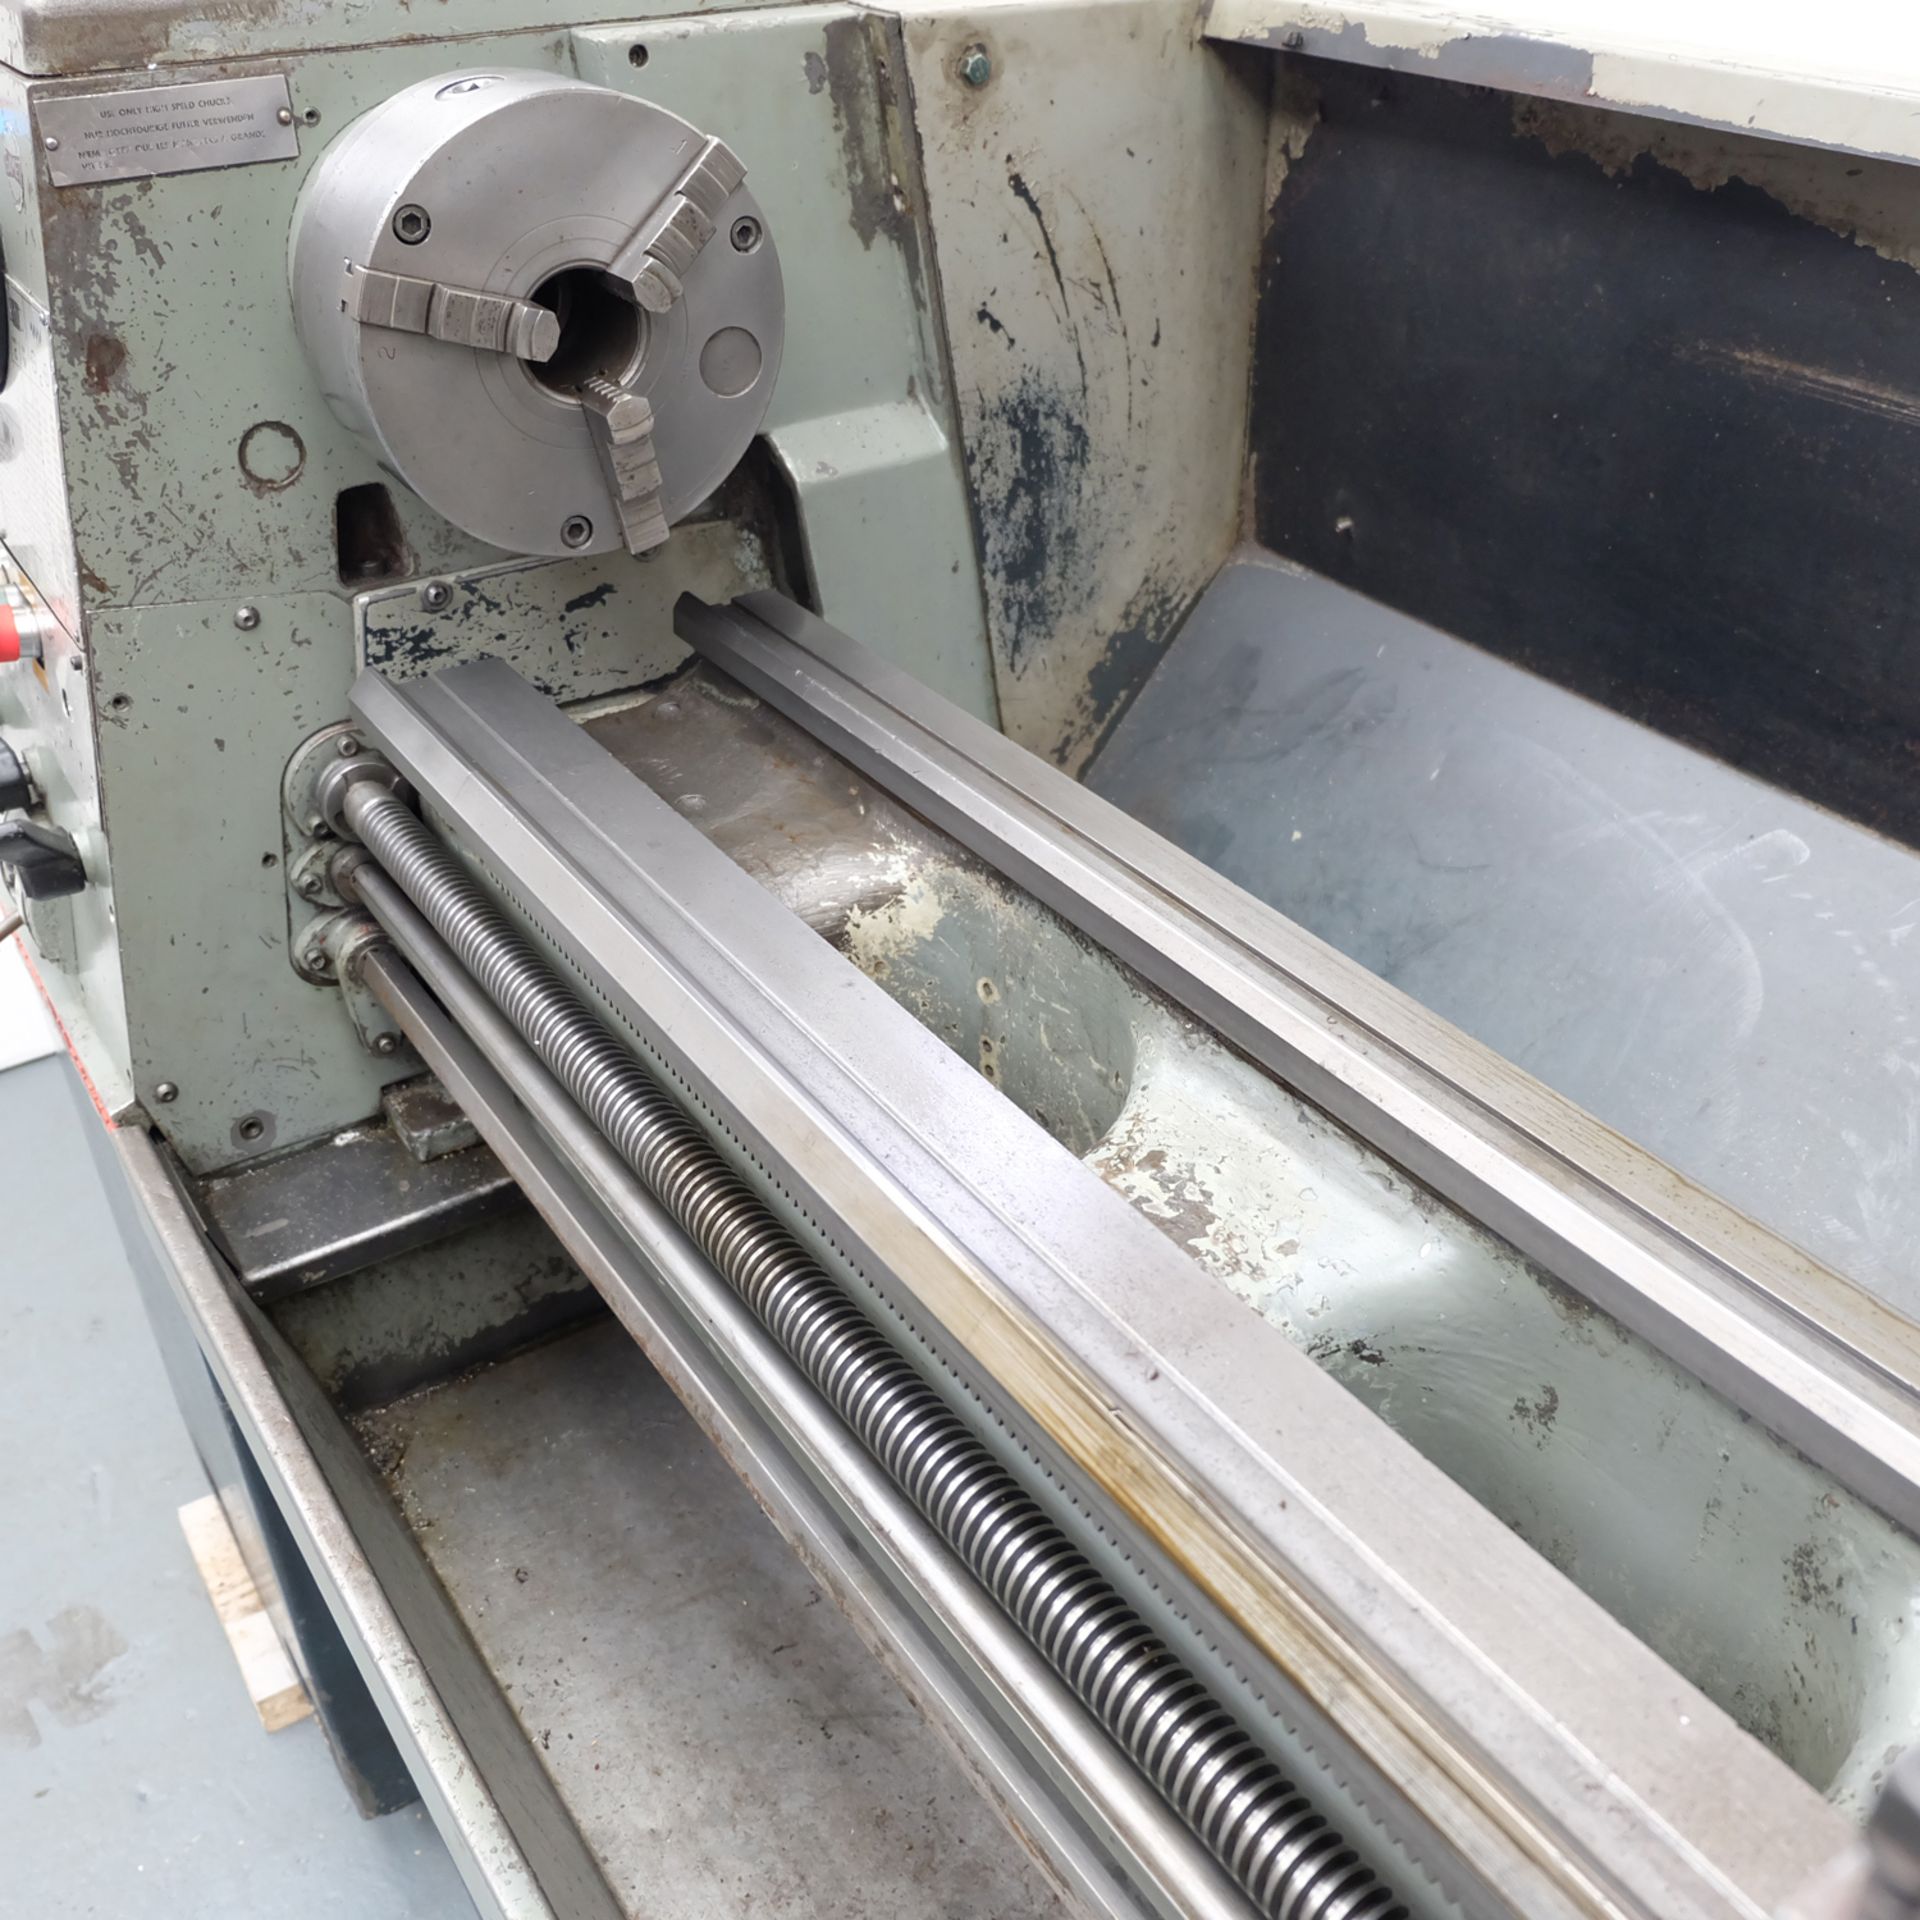 Colchester Master 2500 Gap Bed Centre Lathe. Height of Centres 6 1/2". Swing Over Bed 13 1/4". - Image 7 of 10